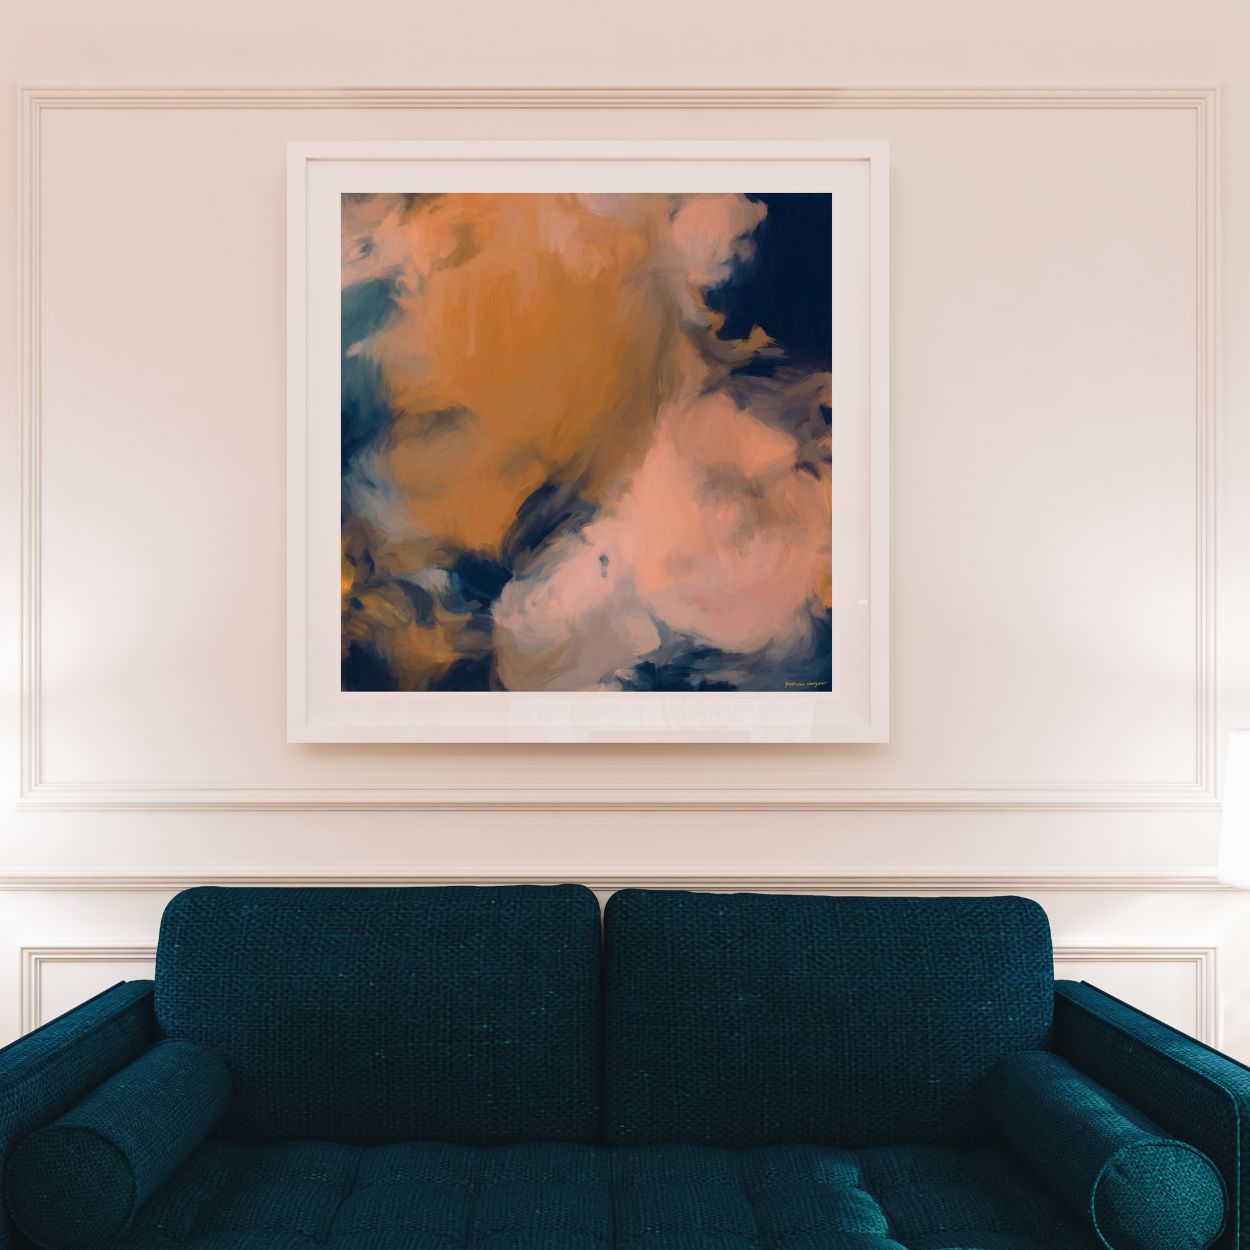 Mia Luna, blue and orange colorful abstract wall art print by Parima Studio. Square art for over sofa in living room